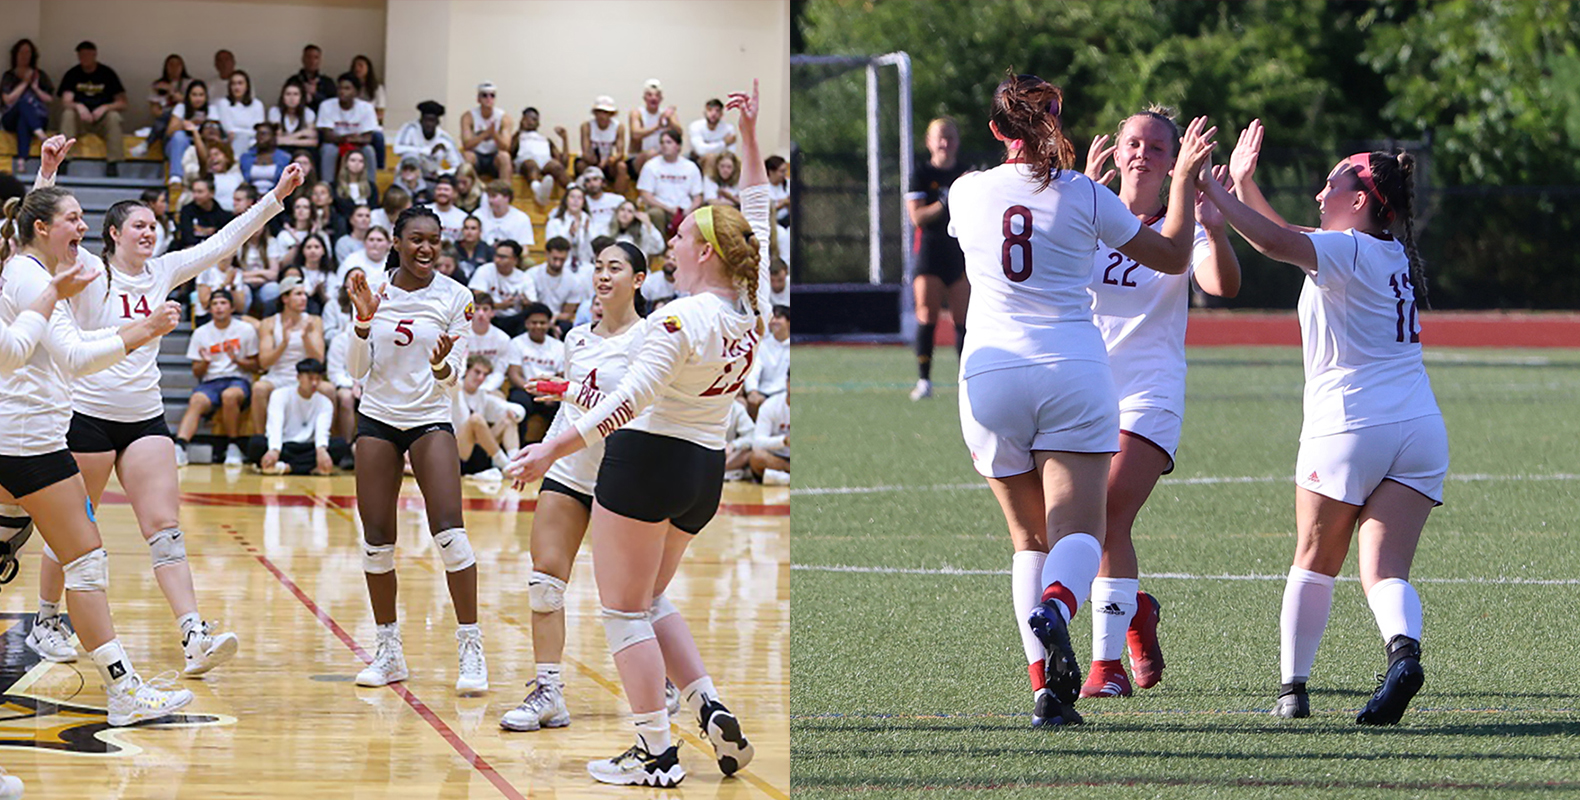 Women’s Volleyball, Women’s Soccer to Host Alumni Events